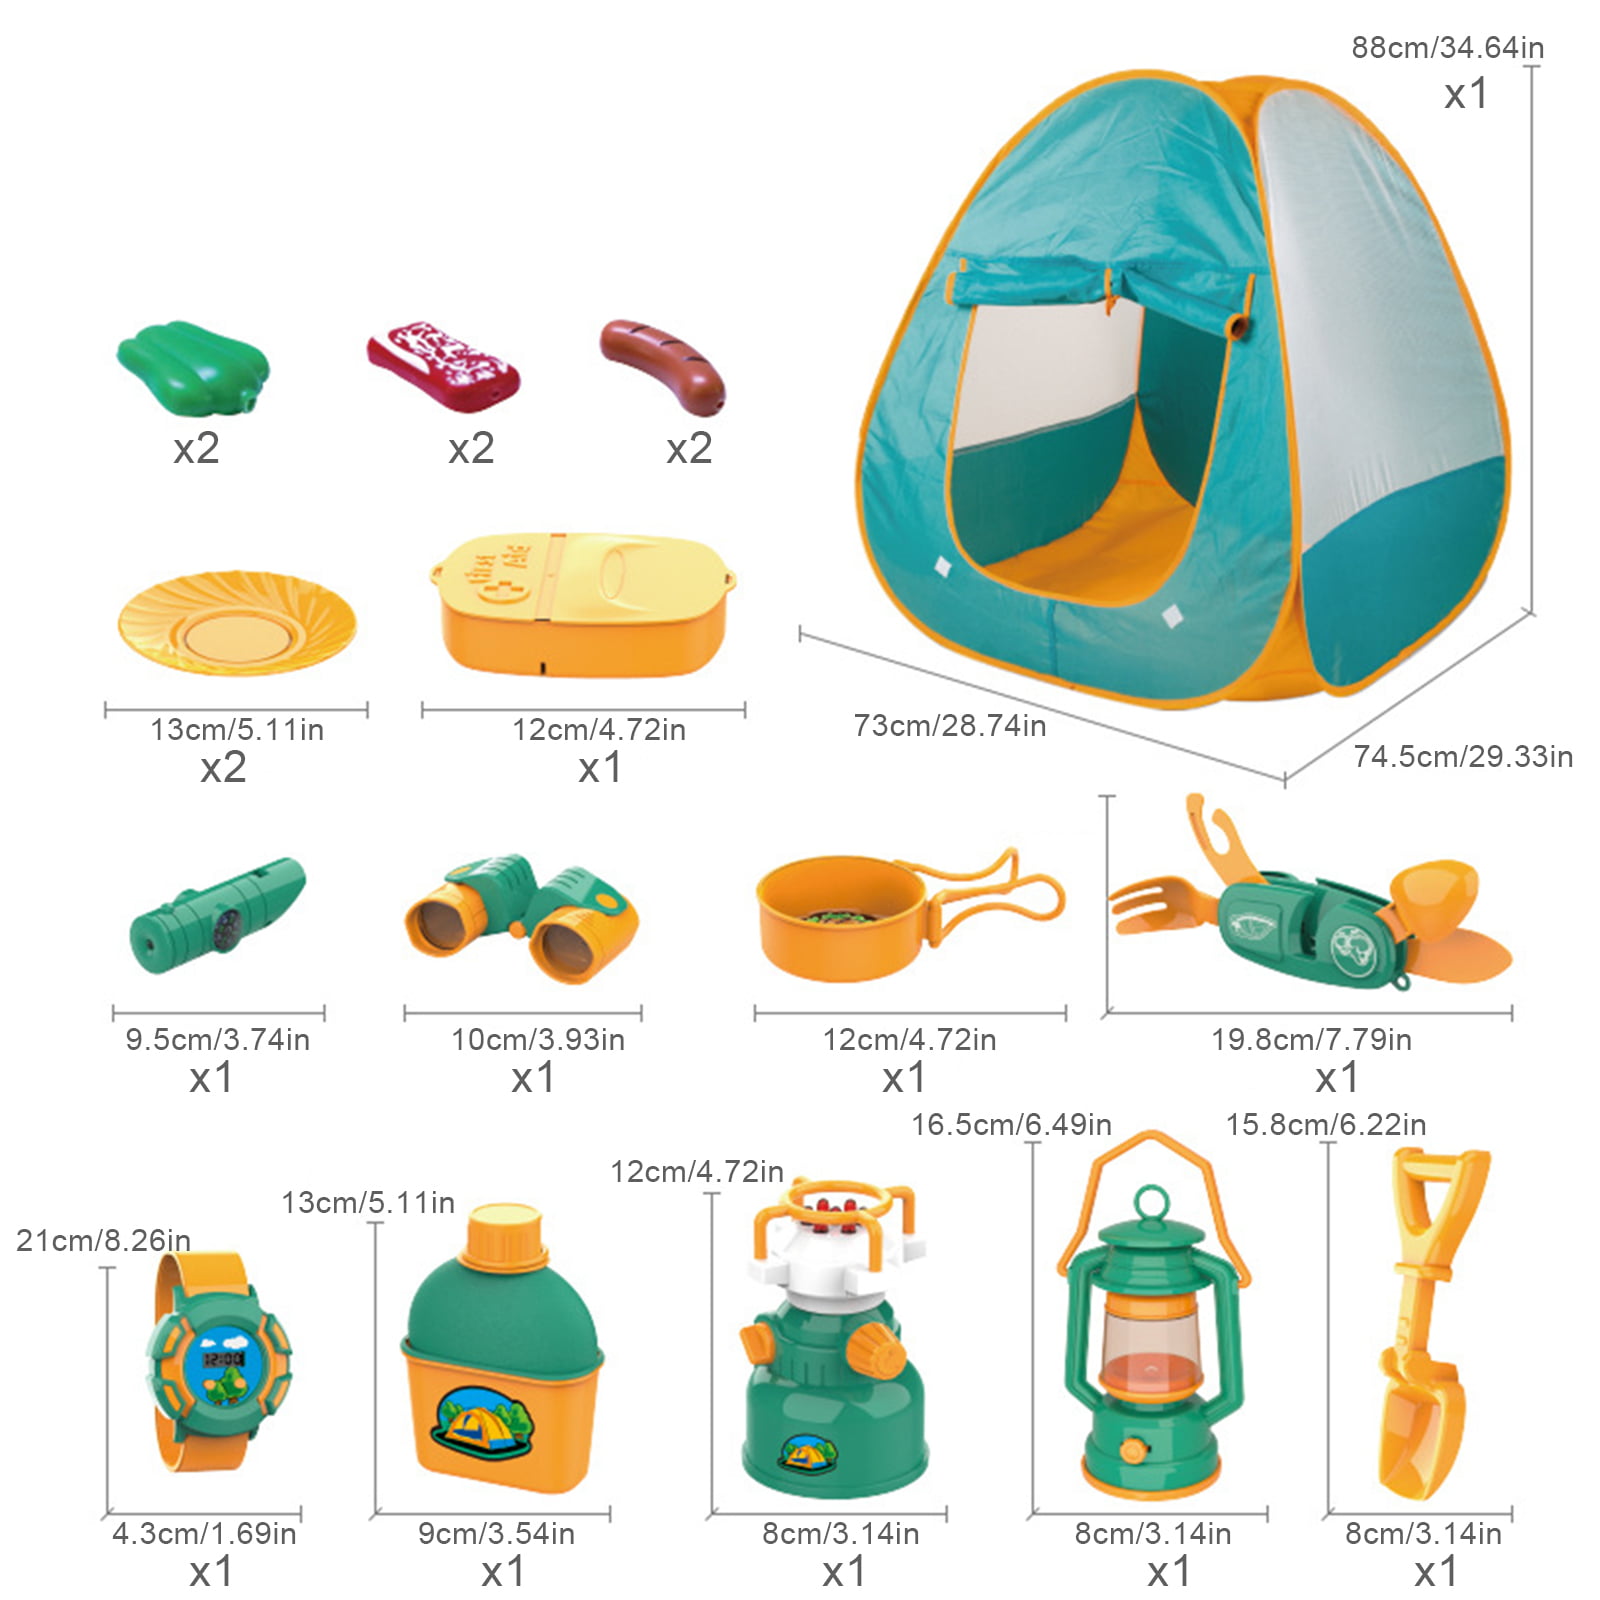  FUN LITTLE TOYS Pop Up Tent with Kids Camping Gear Set, Kids  Play Tent Outdoor Toys Camping Tools Set for Kids : CDs & Vinyl